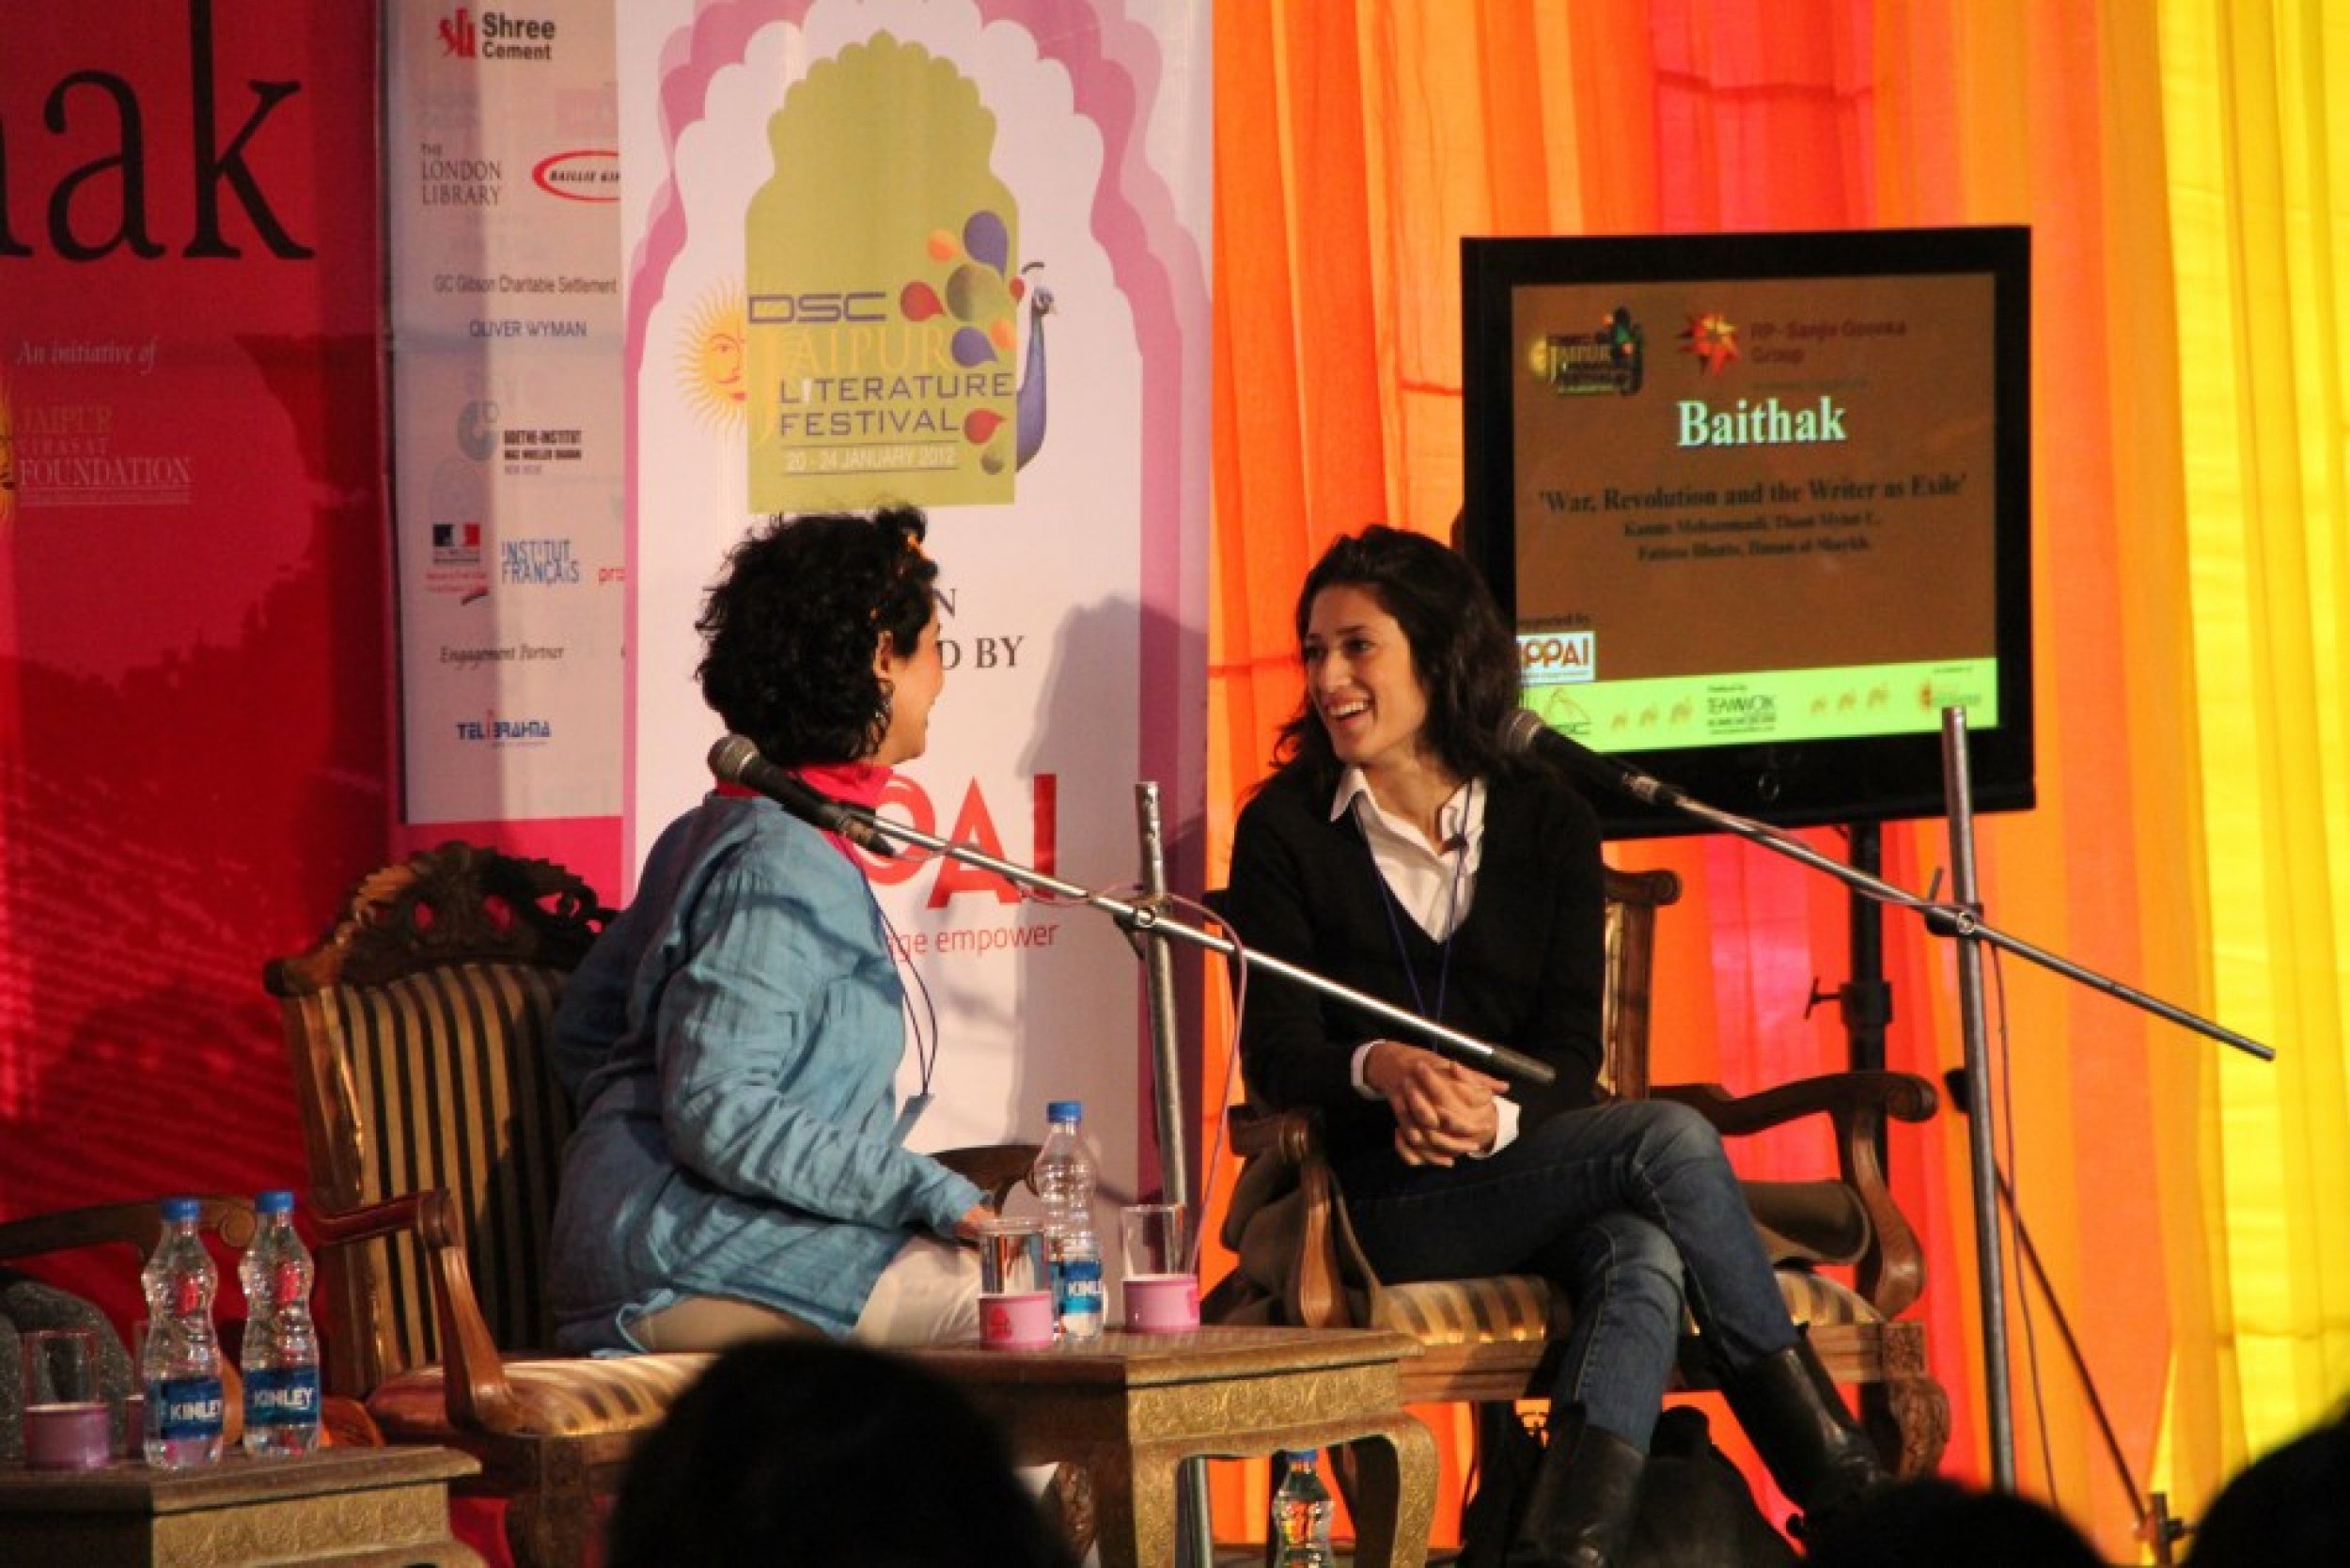 Jaipur Literature Festival 2012. The five-day-long festival aims to showcase the best of Indian, South Asian and international writing in one of the worlds fastest-growing publishing markets.